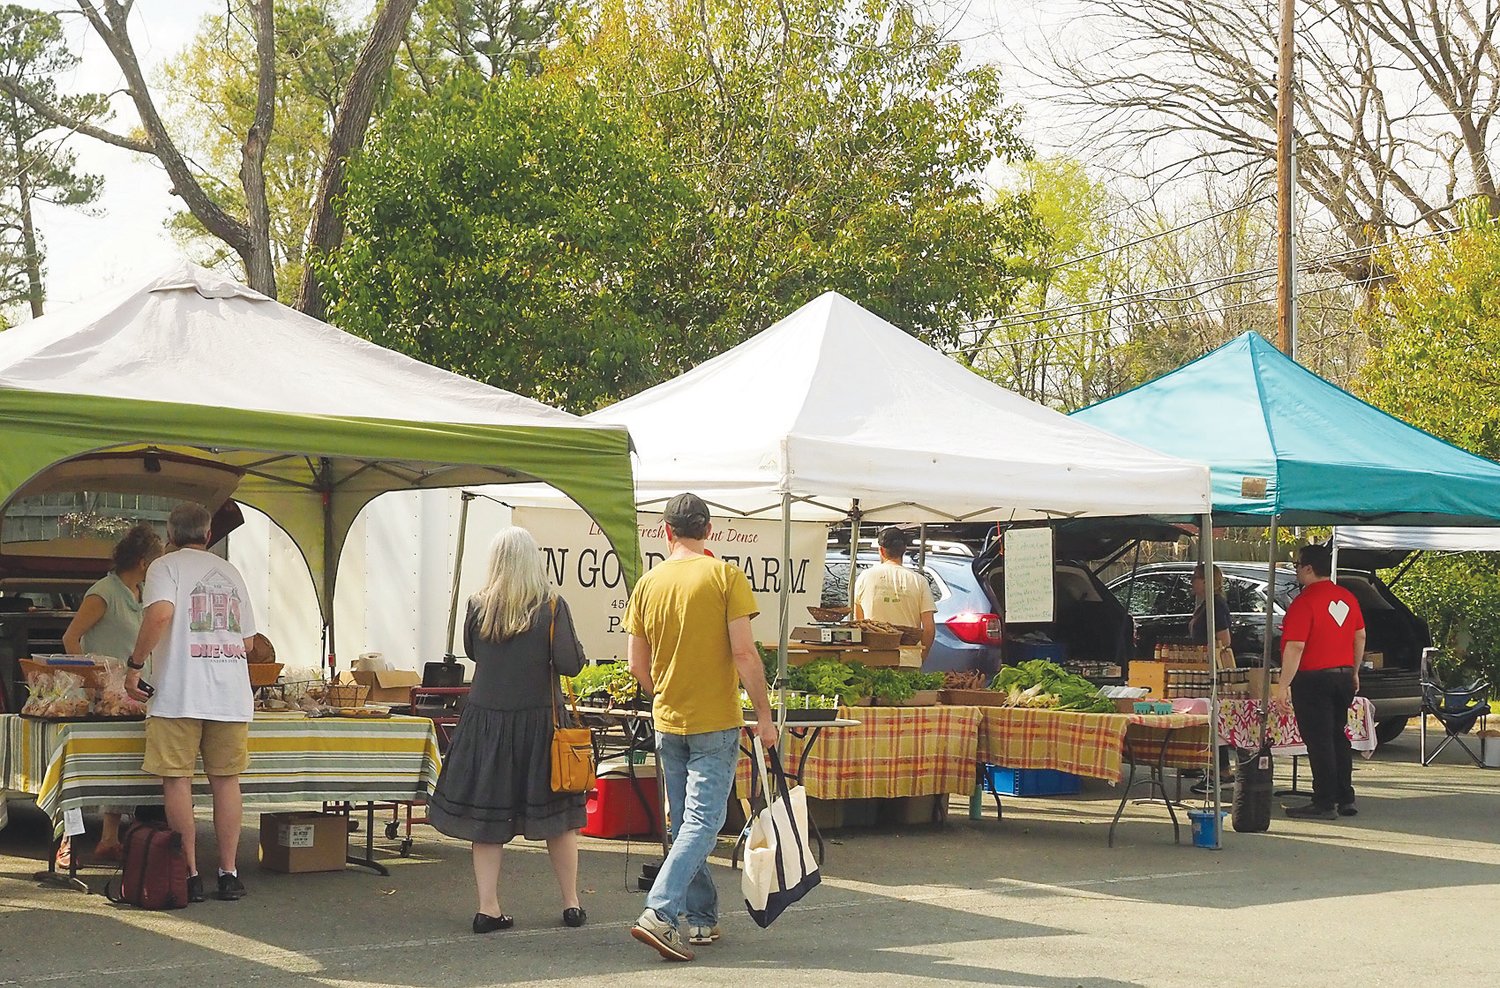 Pittsboro's market has a diverse collection of vendors offering fresh vegetables, baked bread, sauces and more.